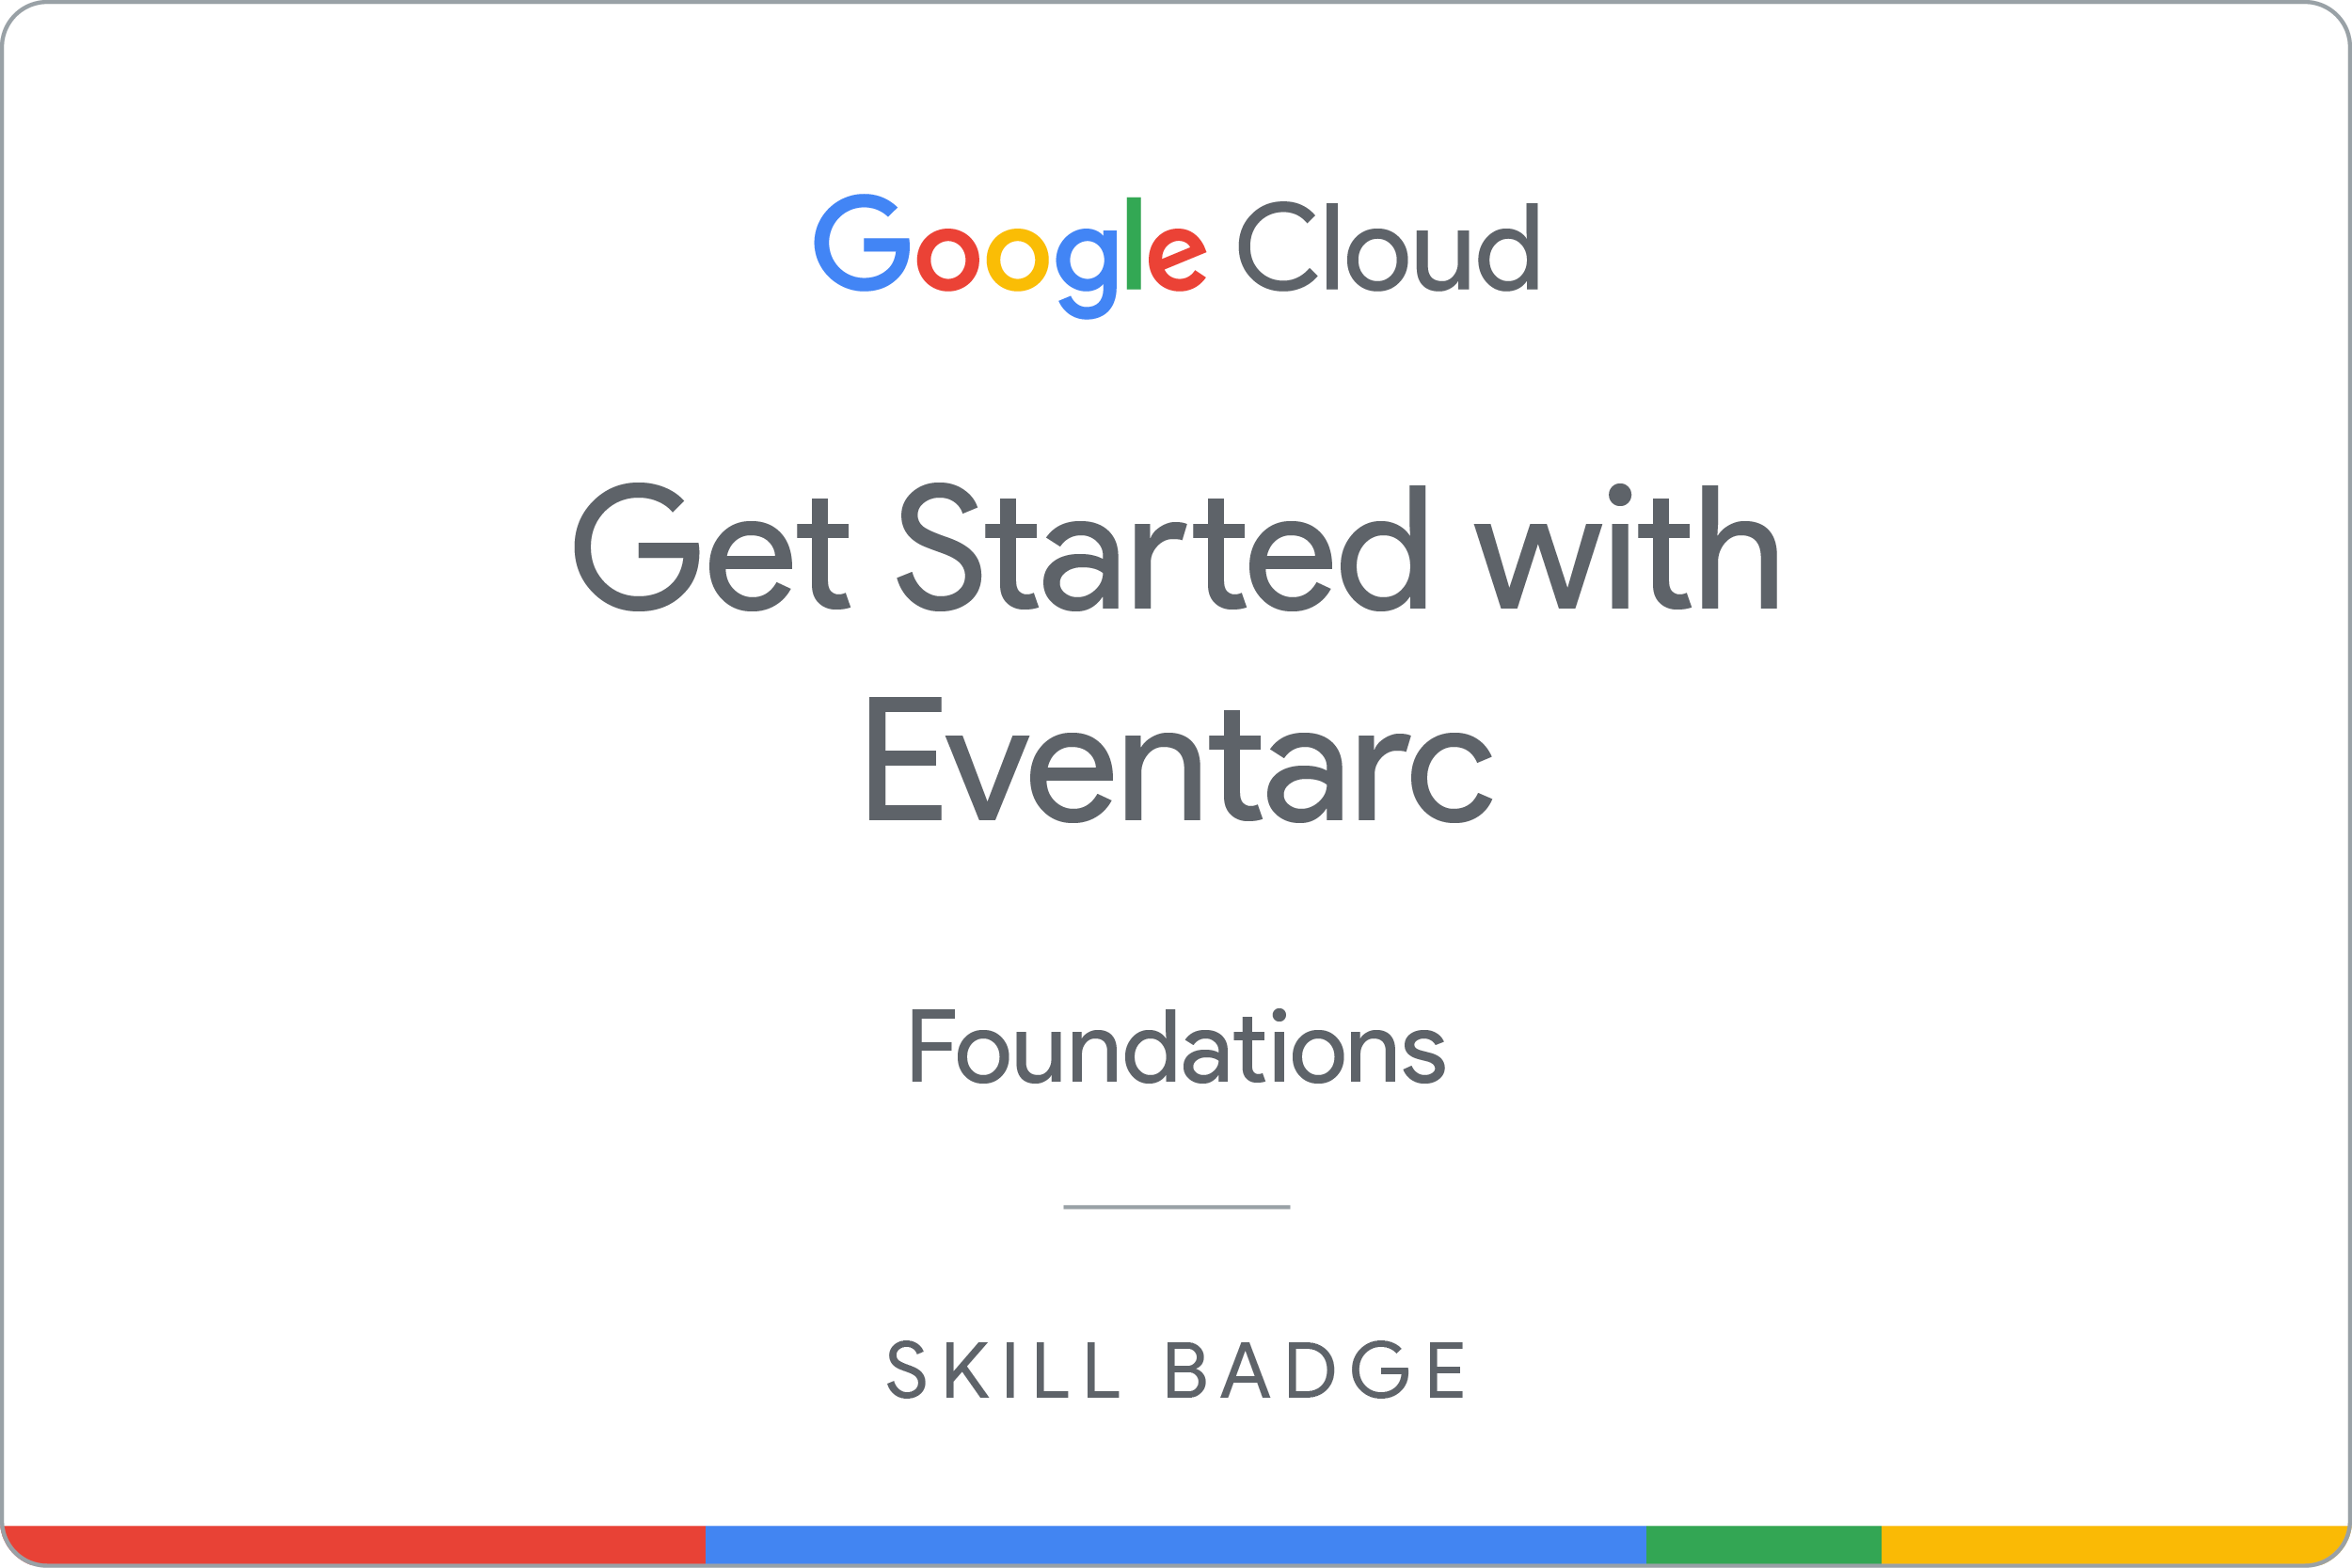 Get Started with Eventarc badge